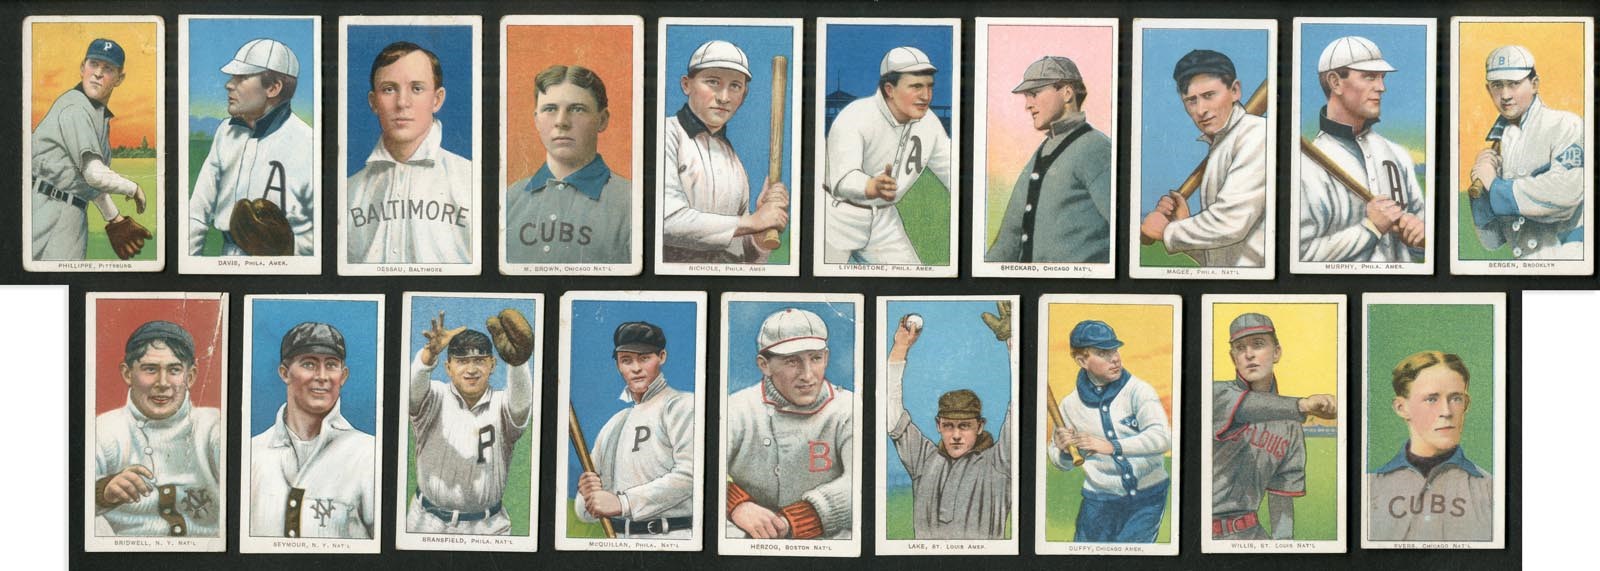 Baseball and Trading Cards - 1909-11 T206 Collection with Major Hall of Famers (19)